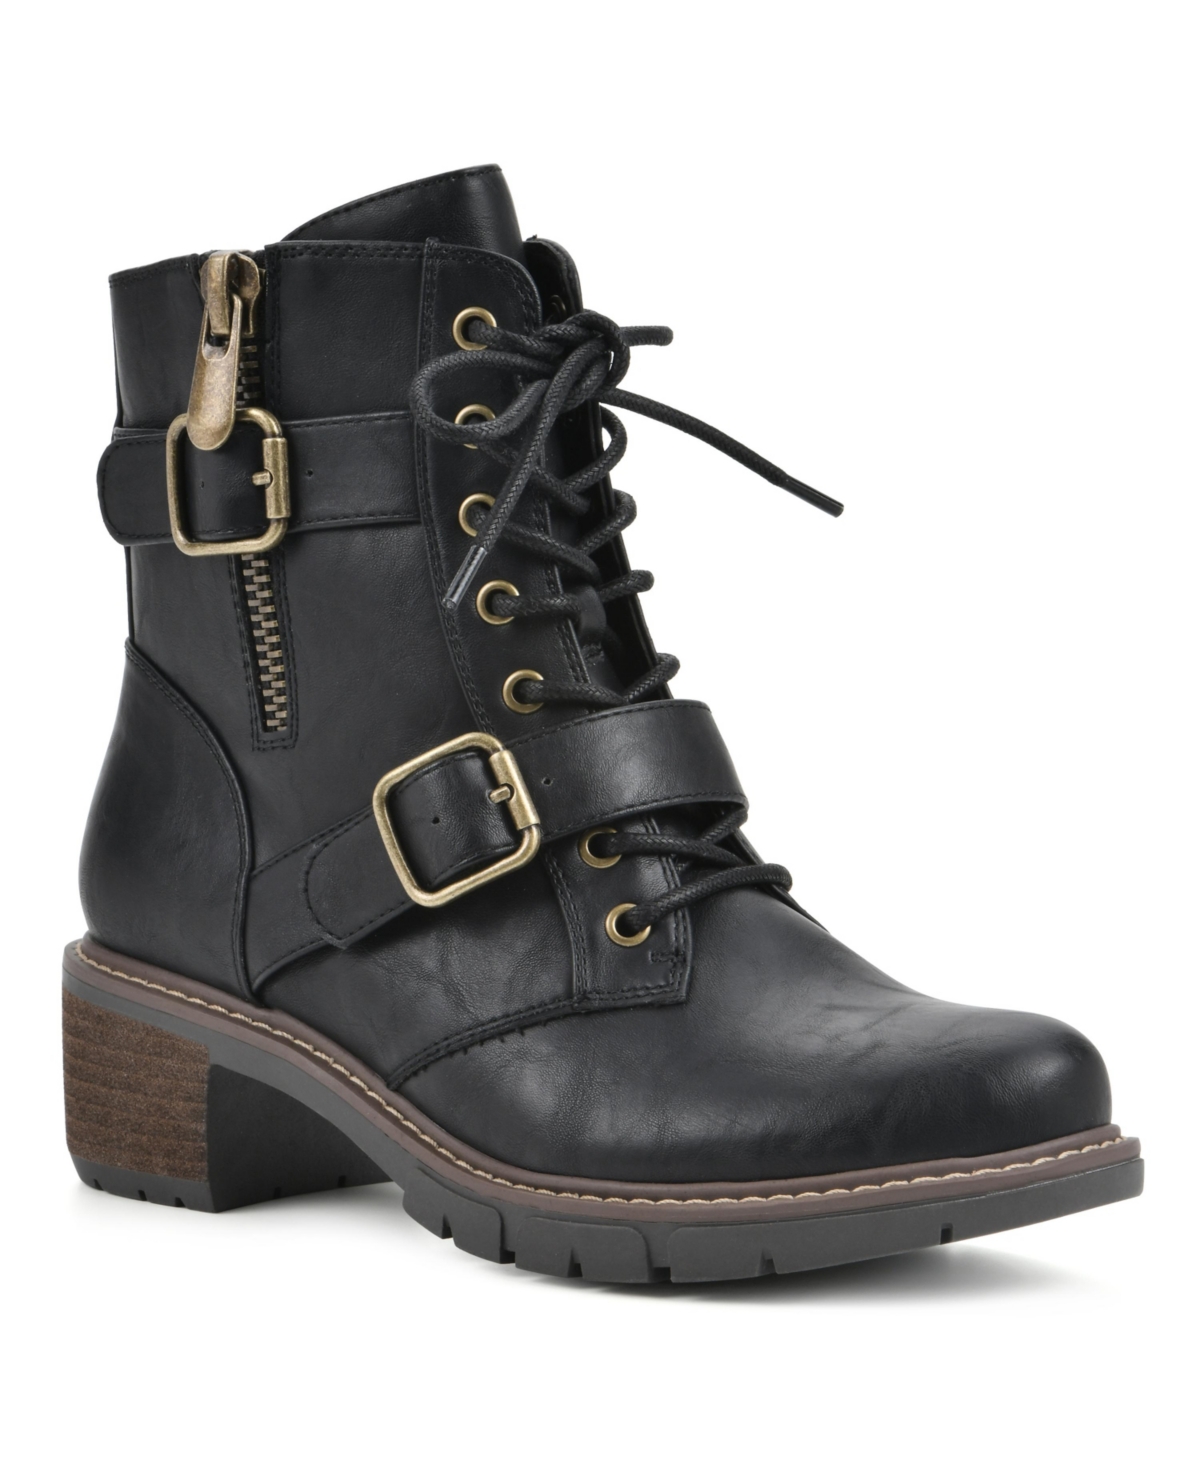 Women's Crank Lace Up Buckle Booties - Black Smooth